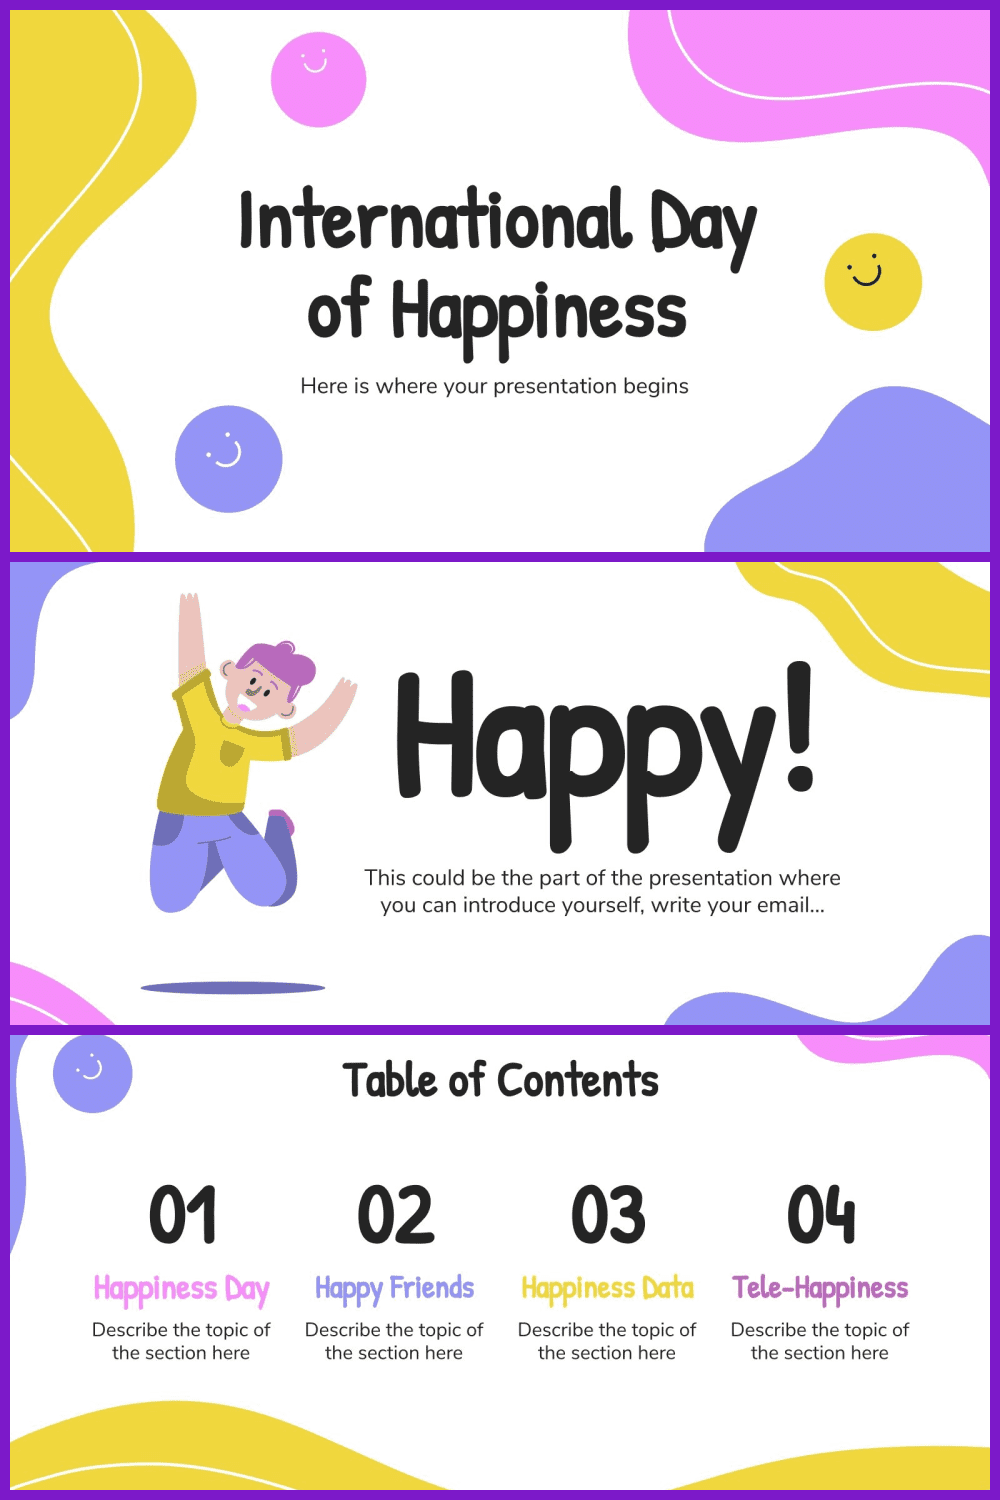 International Day of Happiness.